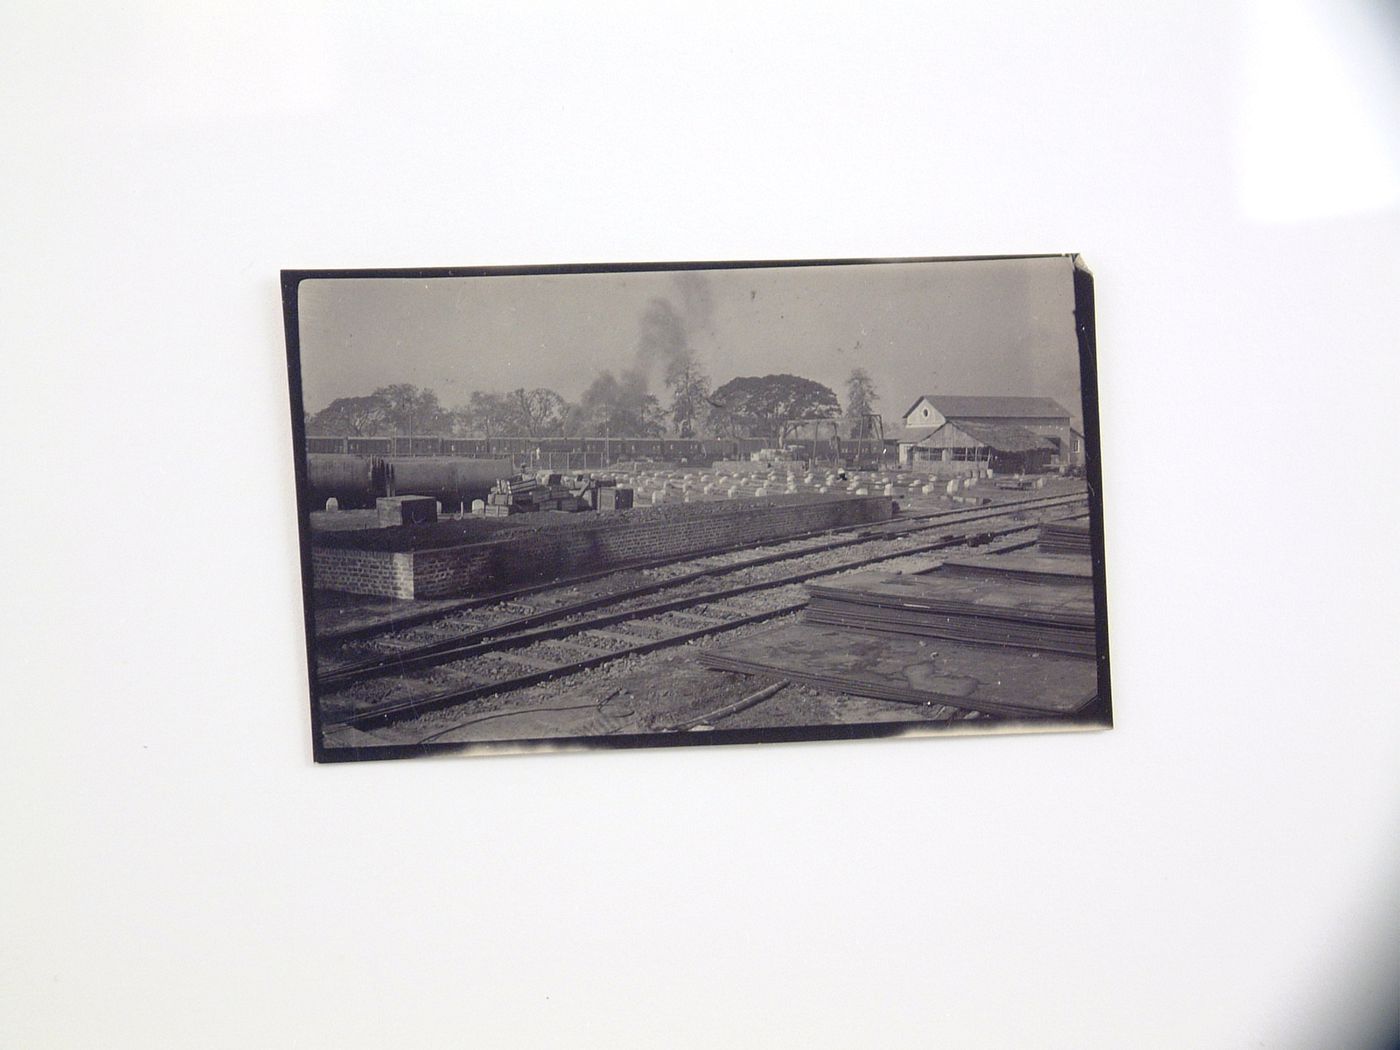 View of railway yard with building materials and train station in background, unknown location